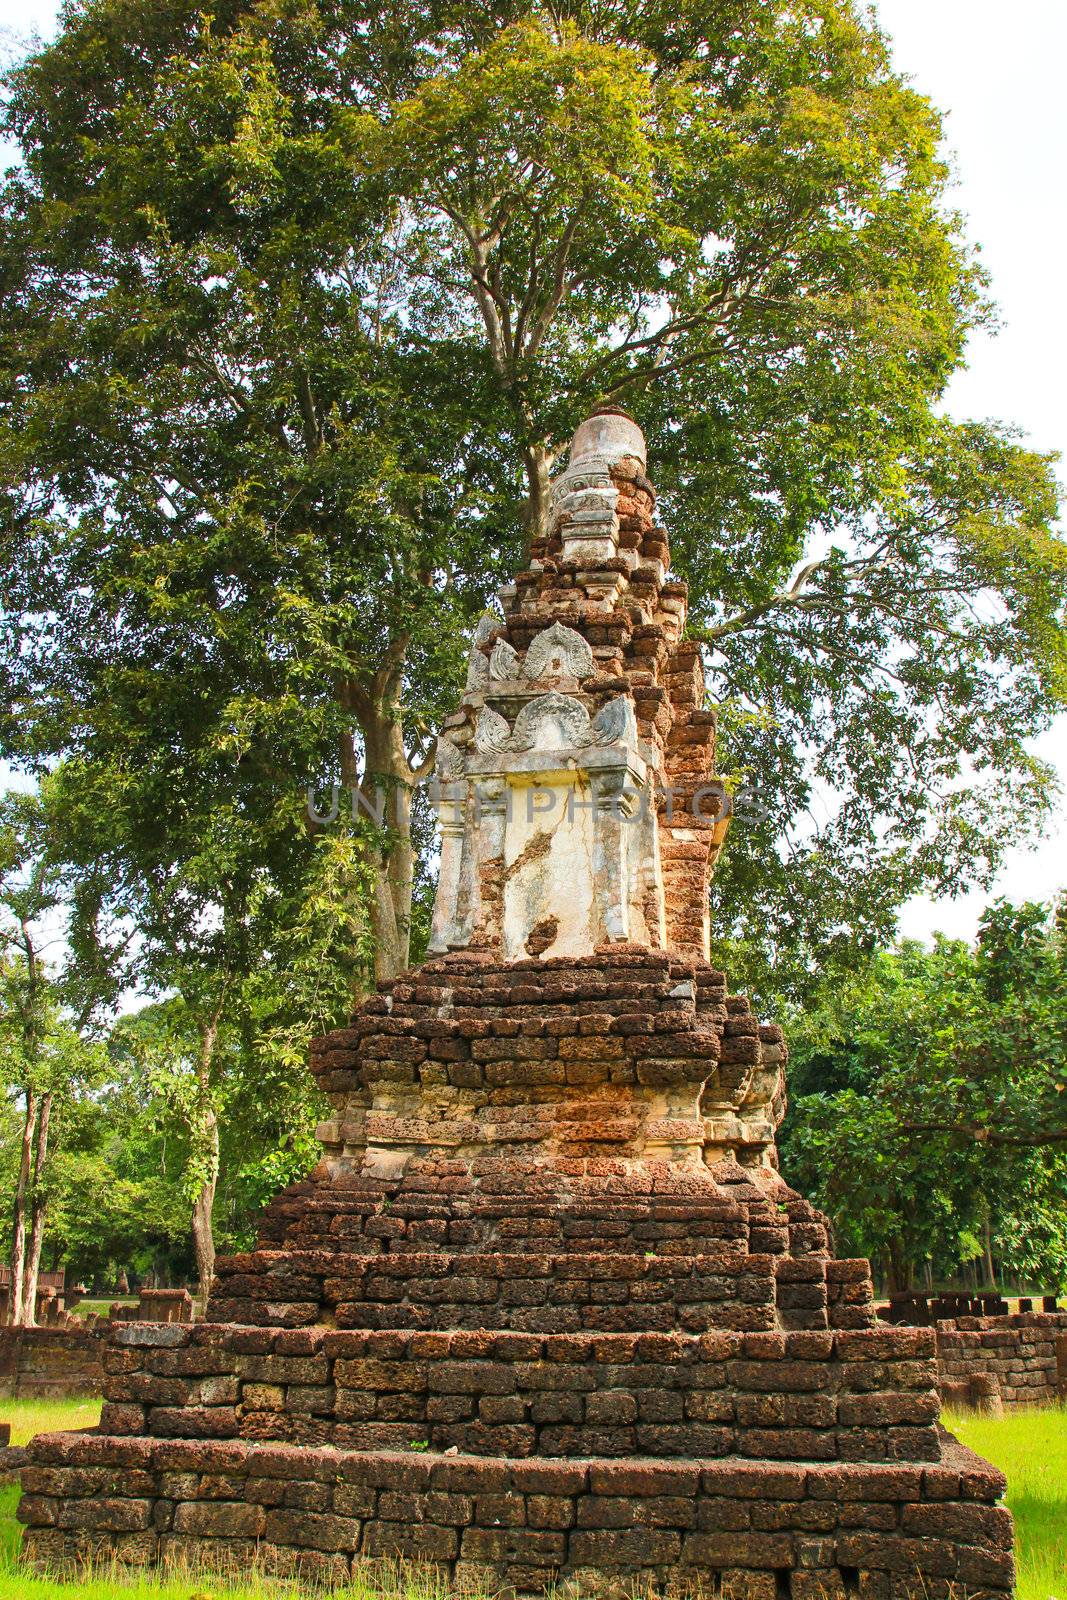 The ruins of the temple in history park sisatchanalai, Sukhothai